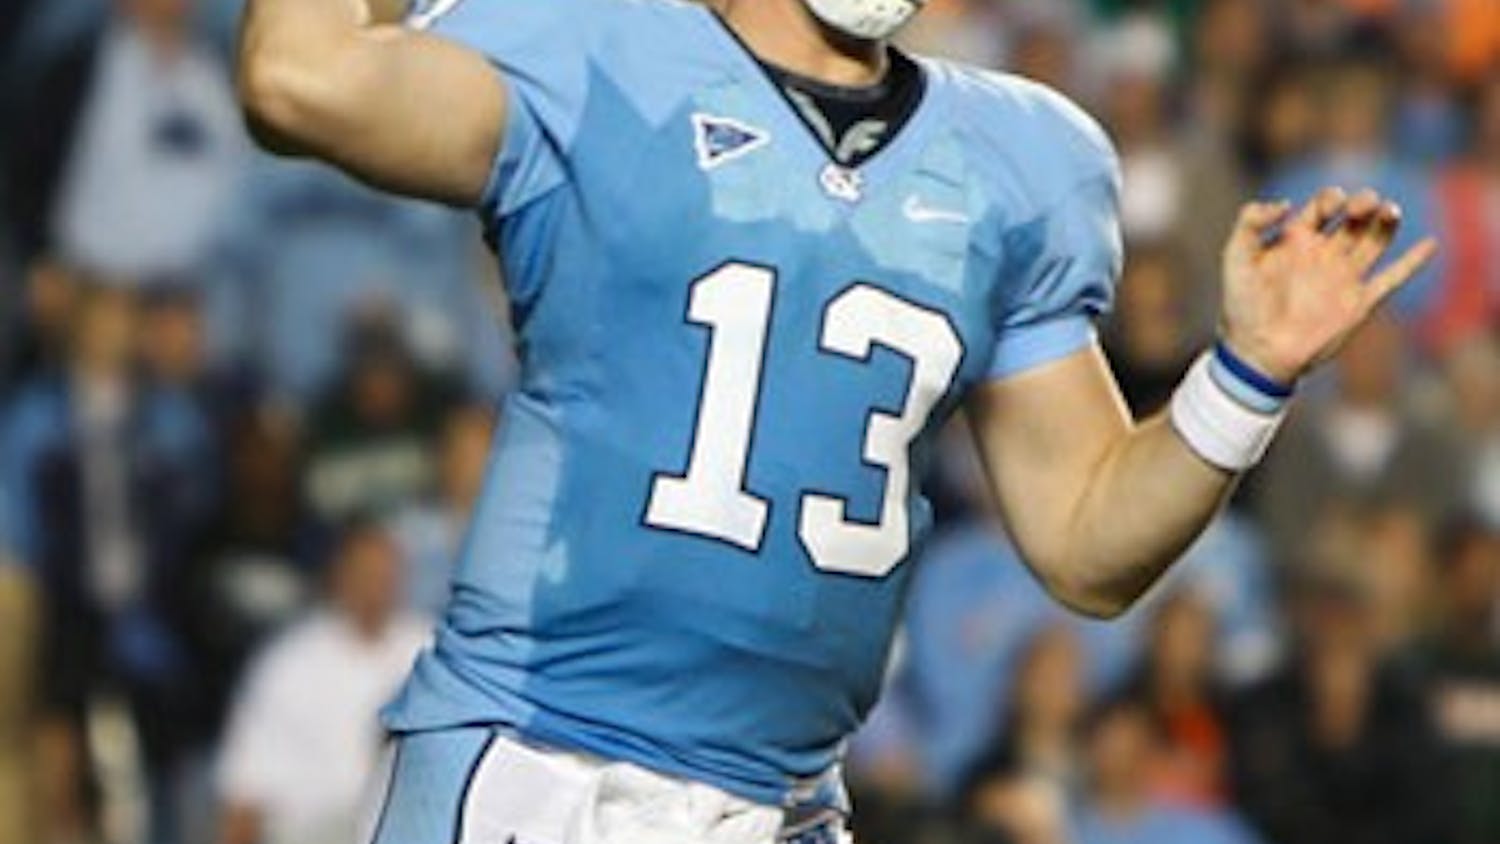 UNC quarterback T.J. Yates threw for 213 yards and one touchdown and did not turn the ball over against Miami. DTH/Phong Dinh